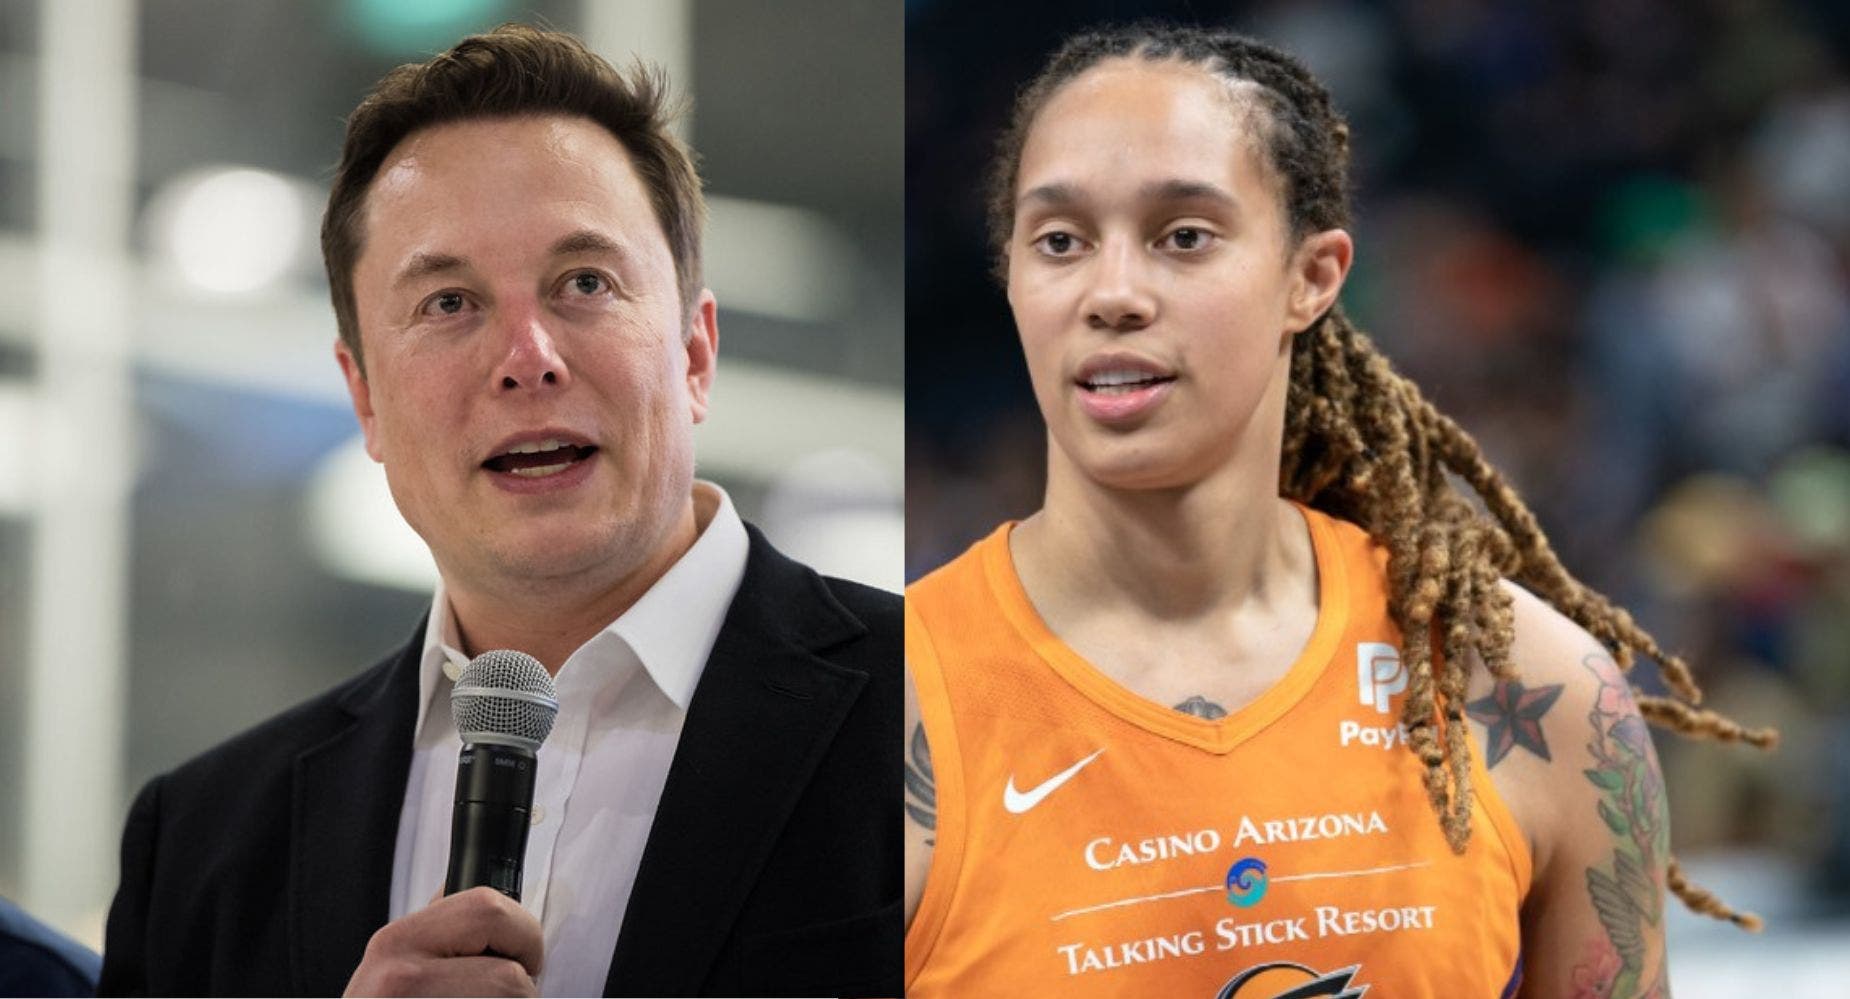 Here's What Elon Musk Said About The Brittney Griner Prisoner Swap Proposal With Russia